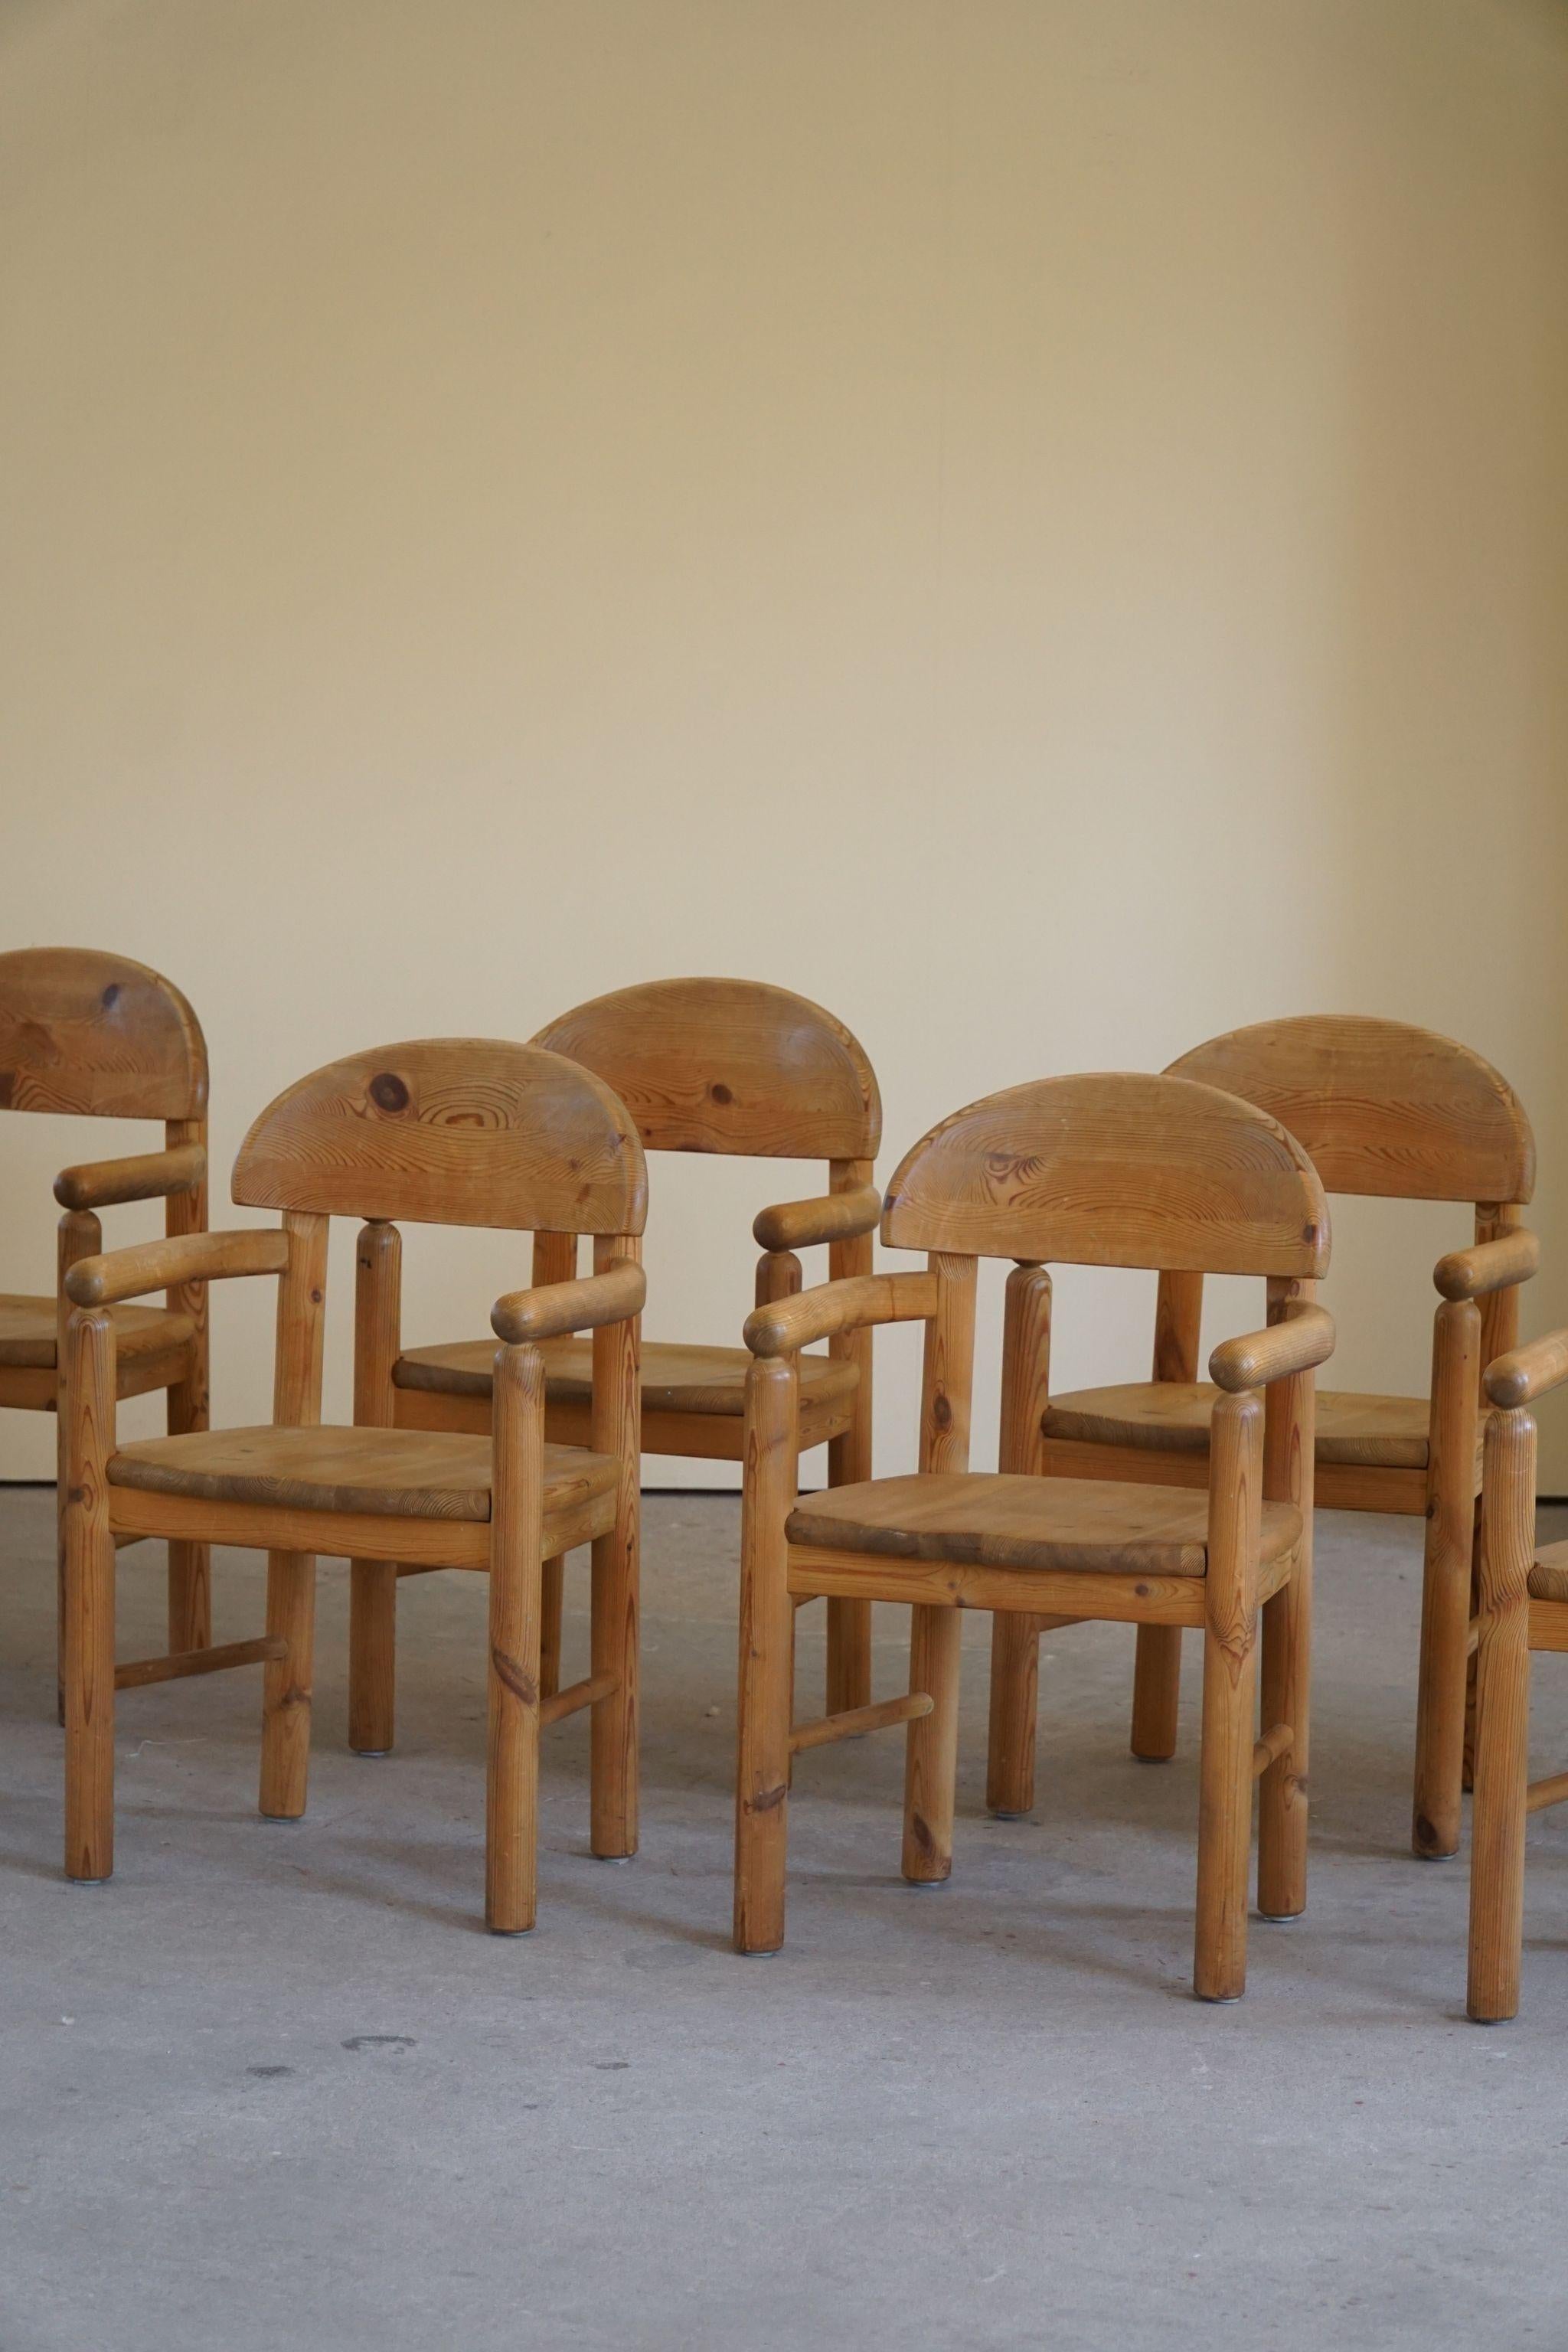 Brutalist Rainer Daumiller, Set of 8 Dining Chairs in Solid Pine, Danish Modern, 1970s